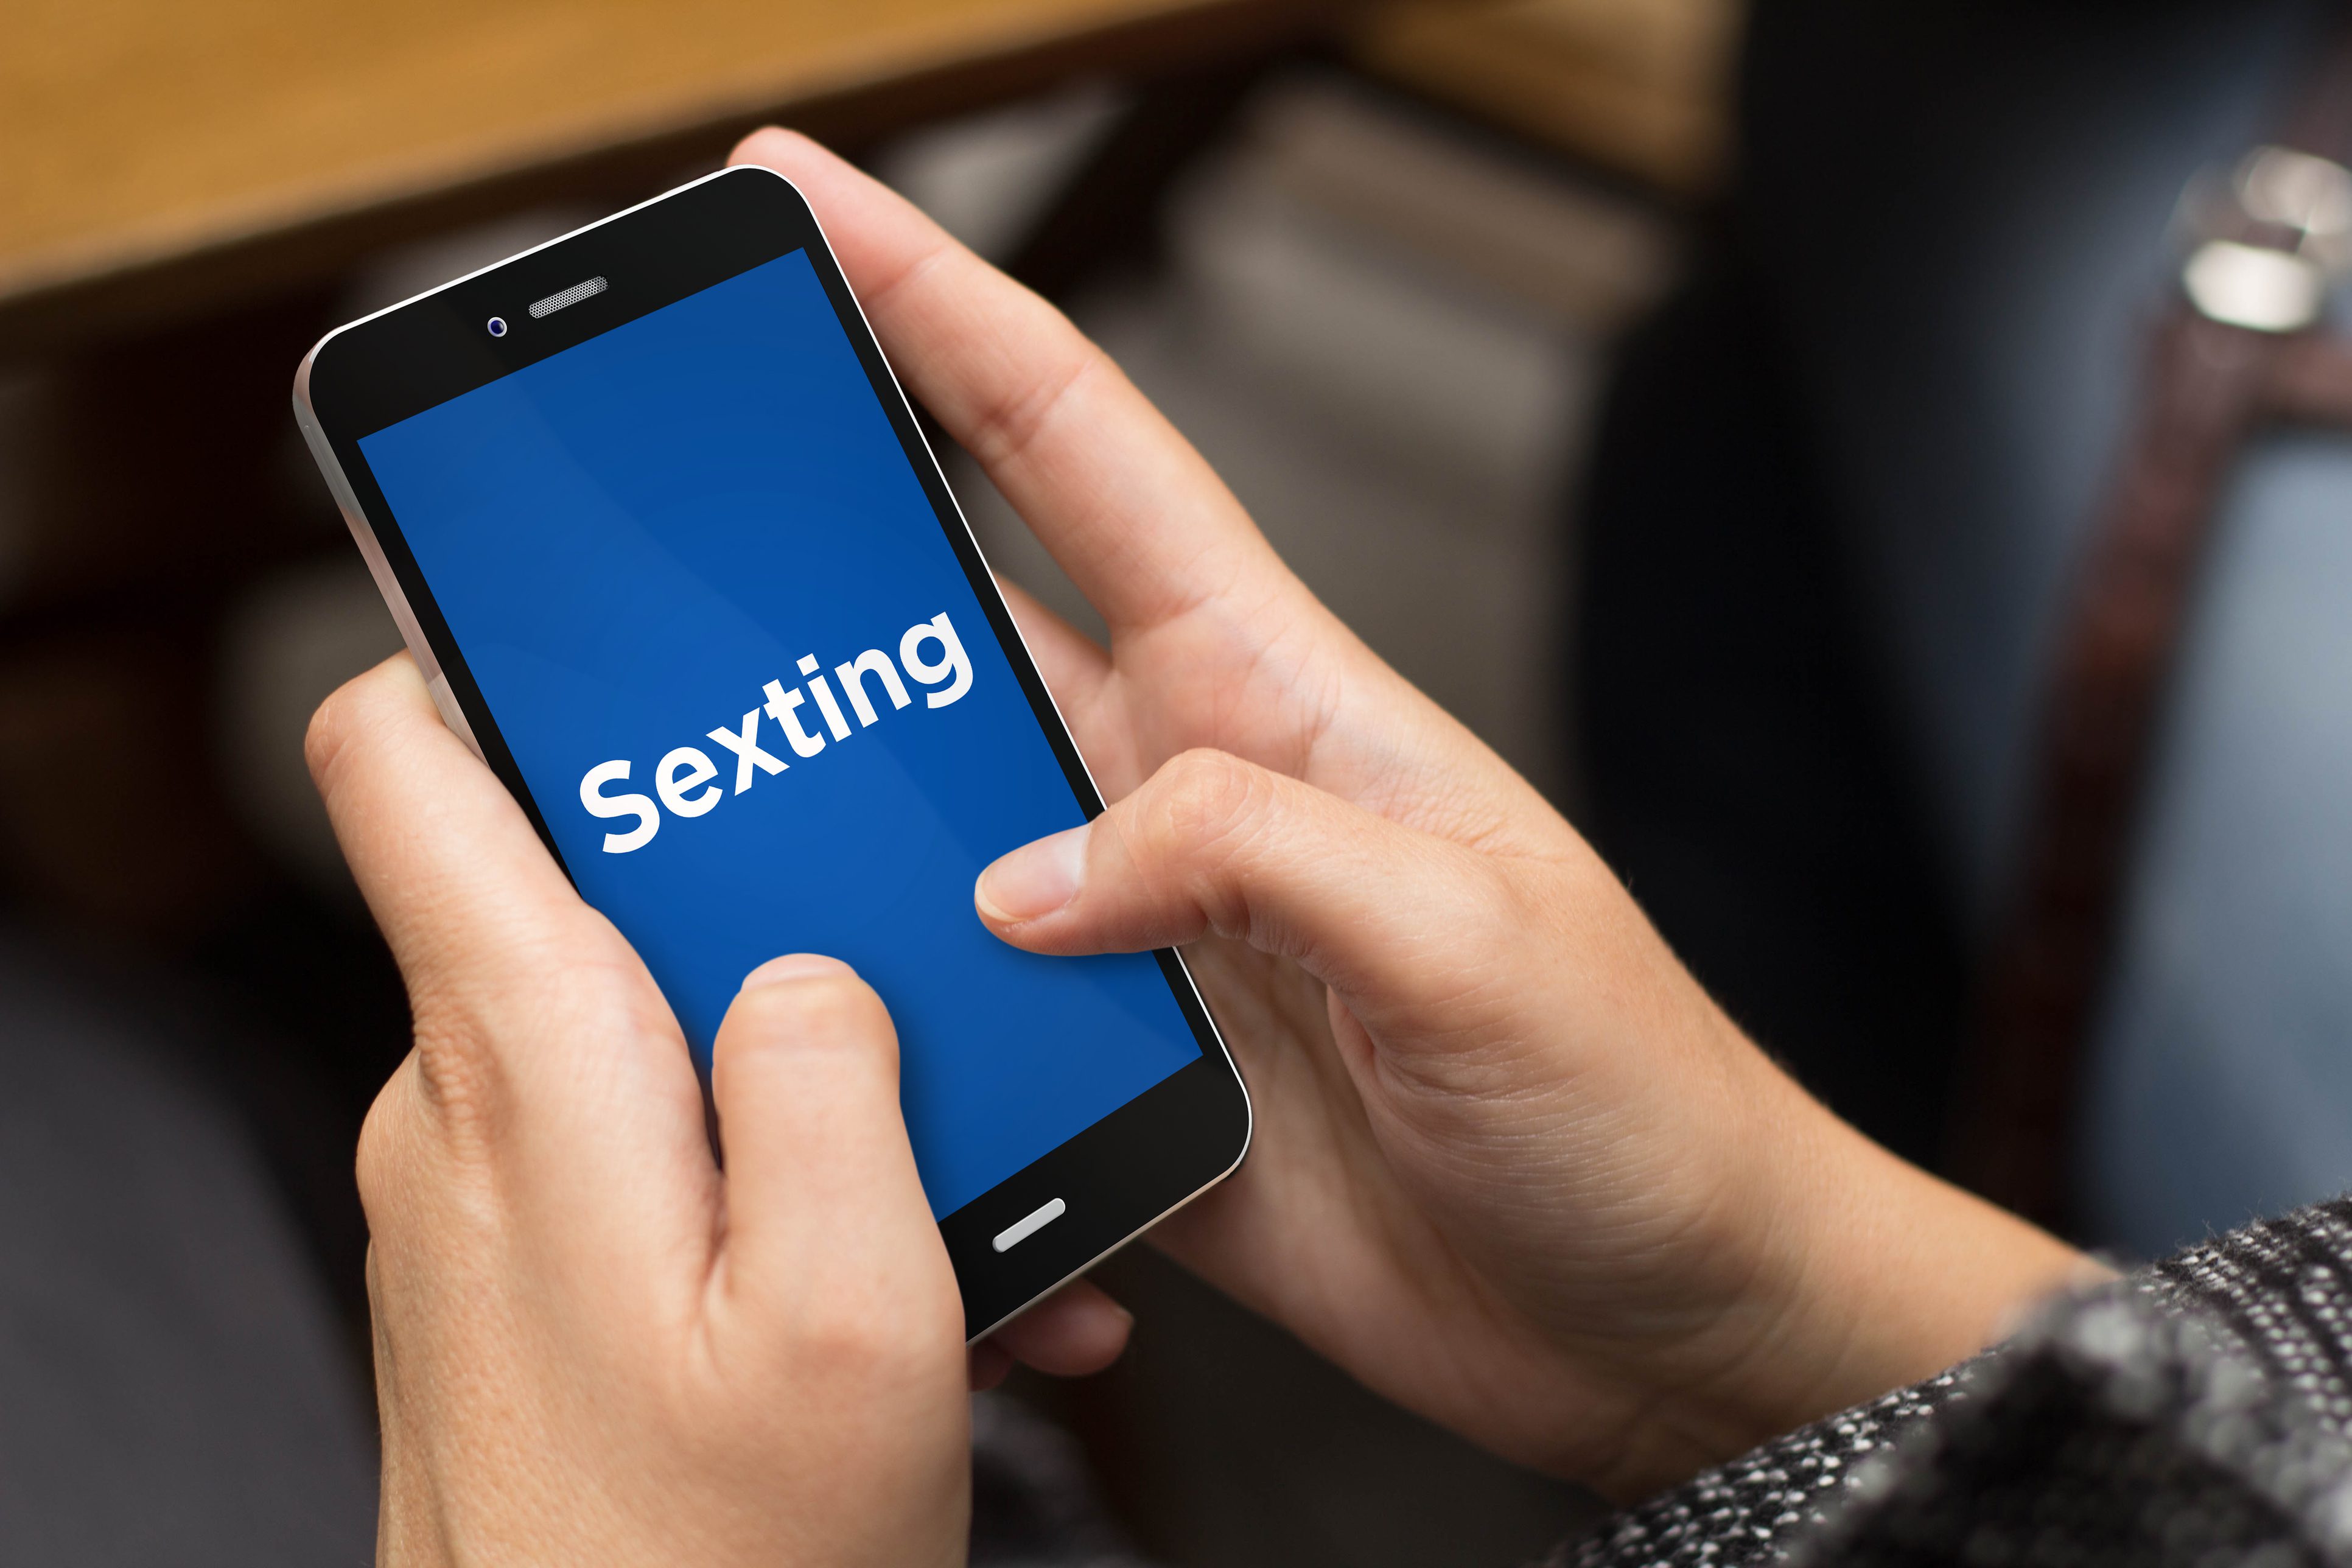 Online Dating: Is It Normal For Conversations To Turn Sexual So Quickly?